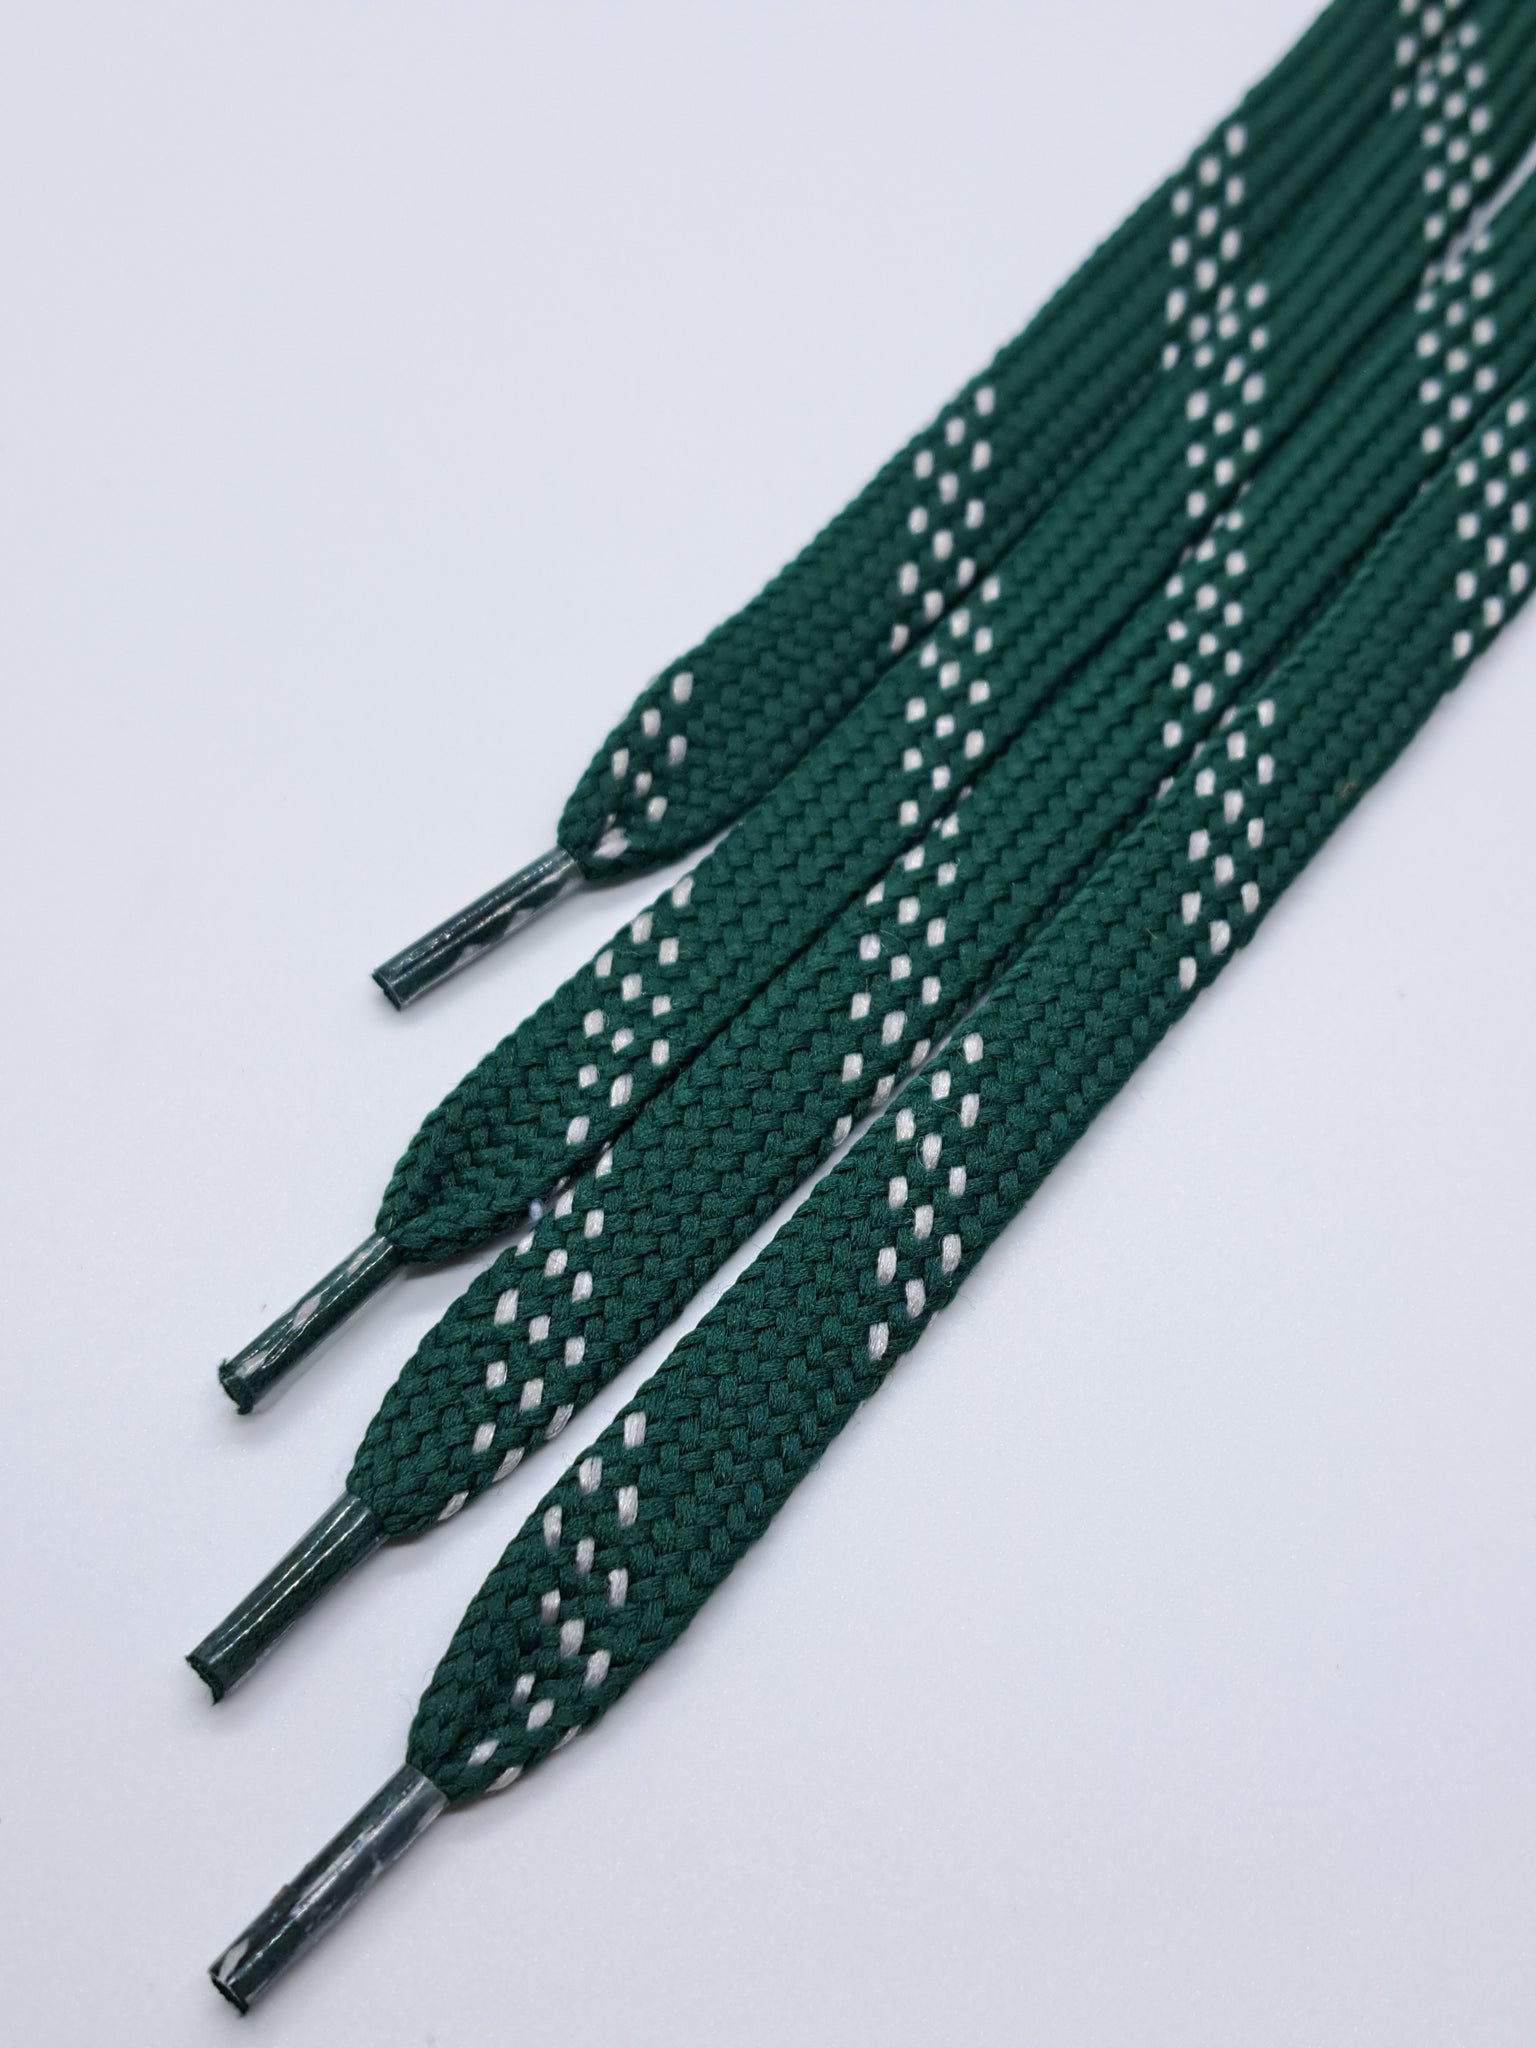 Premium Sport Laces - Forest Green with Silver Accents